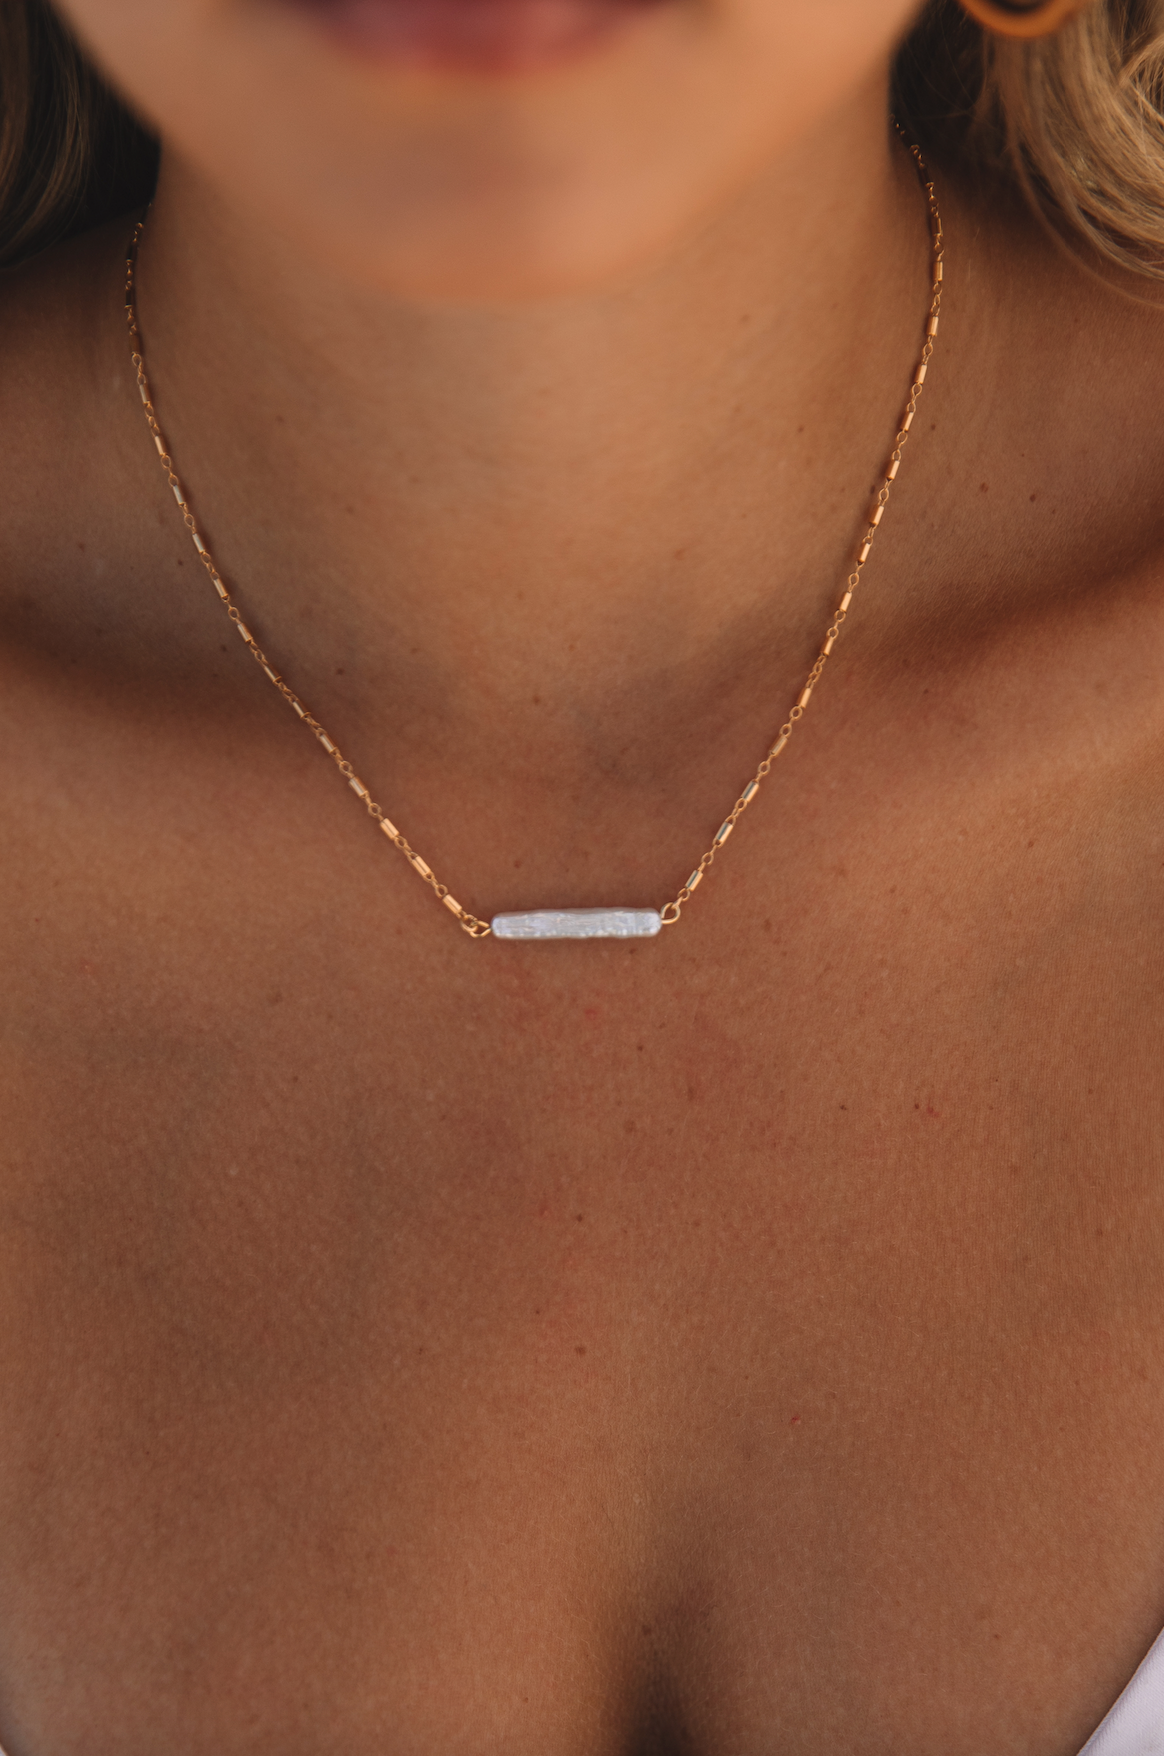 The Freshwater Pearl Bar Necklace